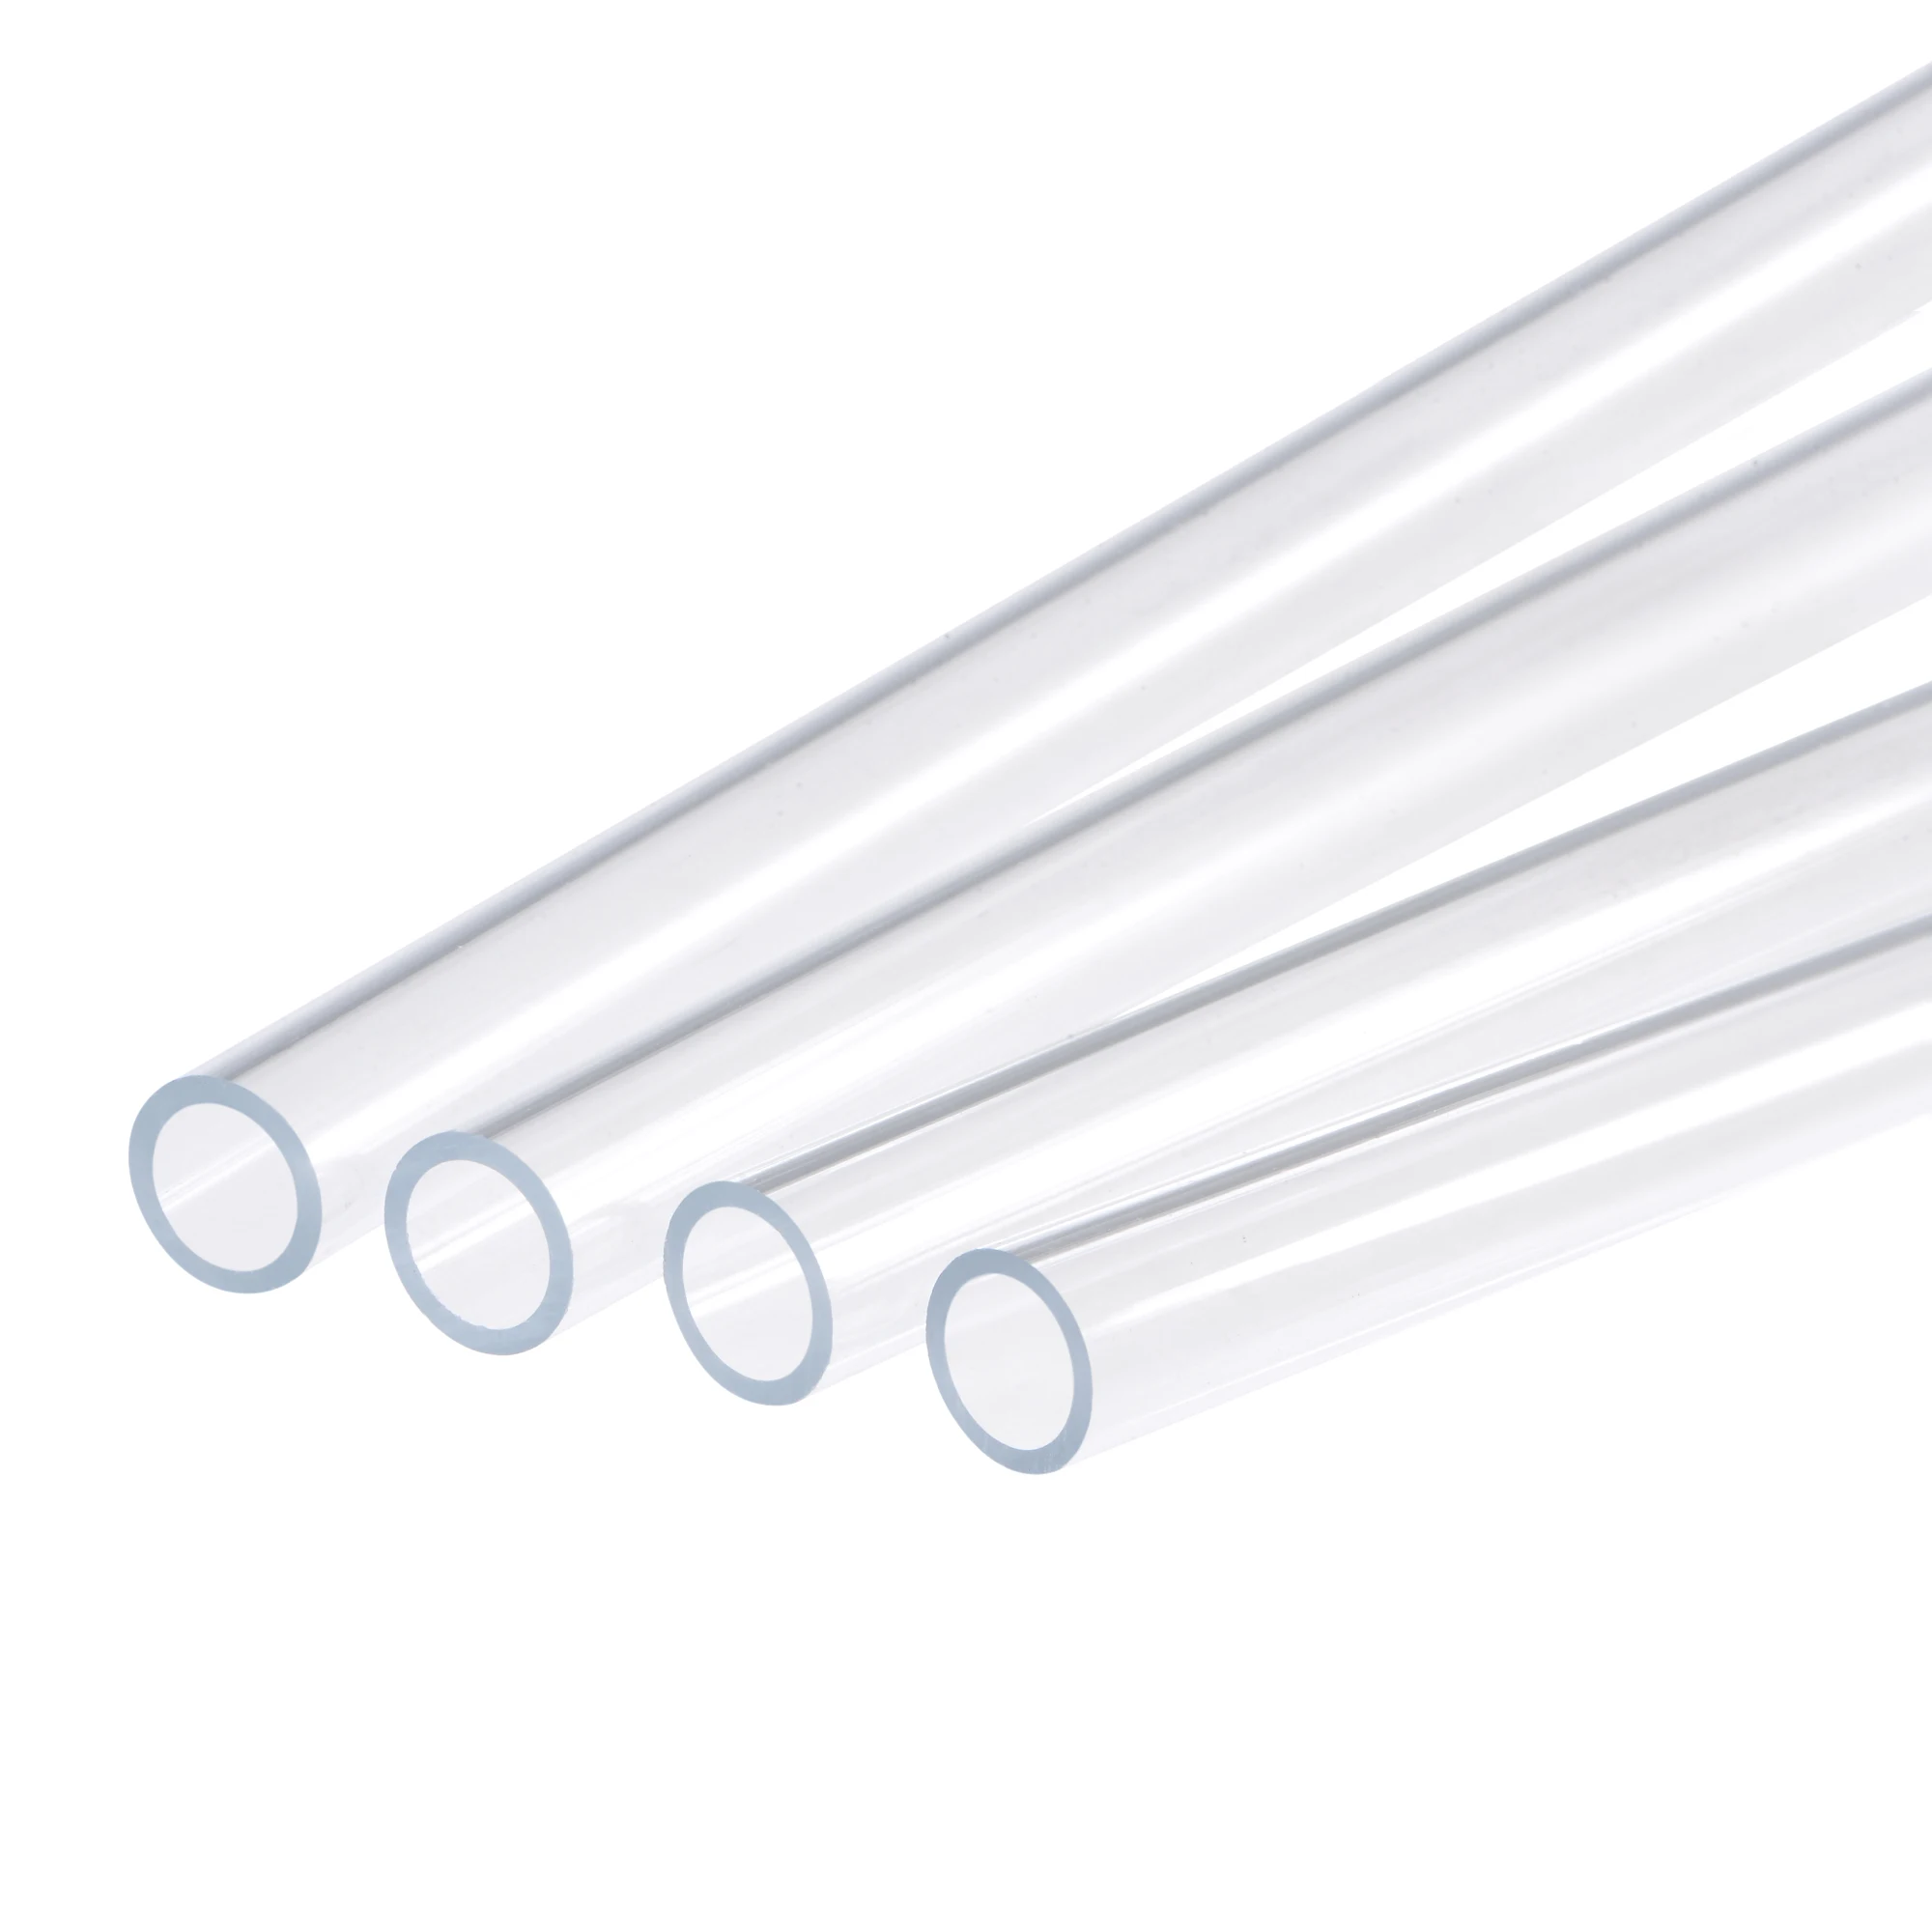 

Uxcell Acrylic Pipe Rigid Round Tube Clear 1/2" ID 5/8" OD 3.3ft High Impact for Lighting, Models, Plumbing, Crafts 4 Packs